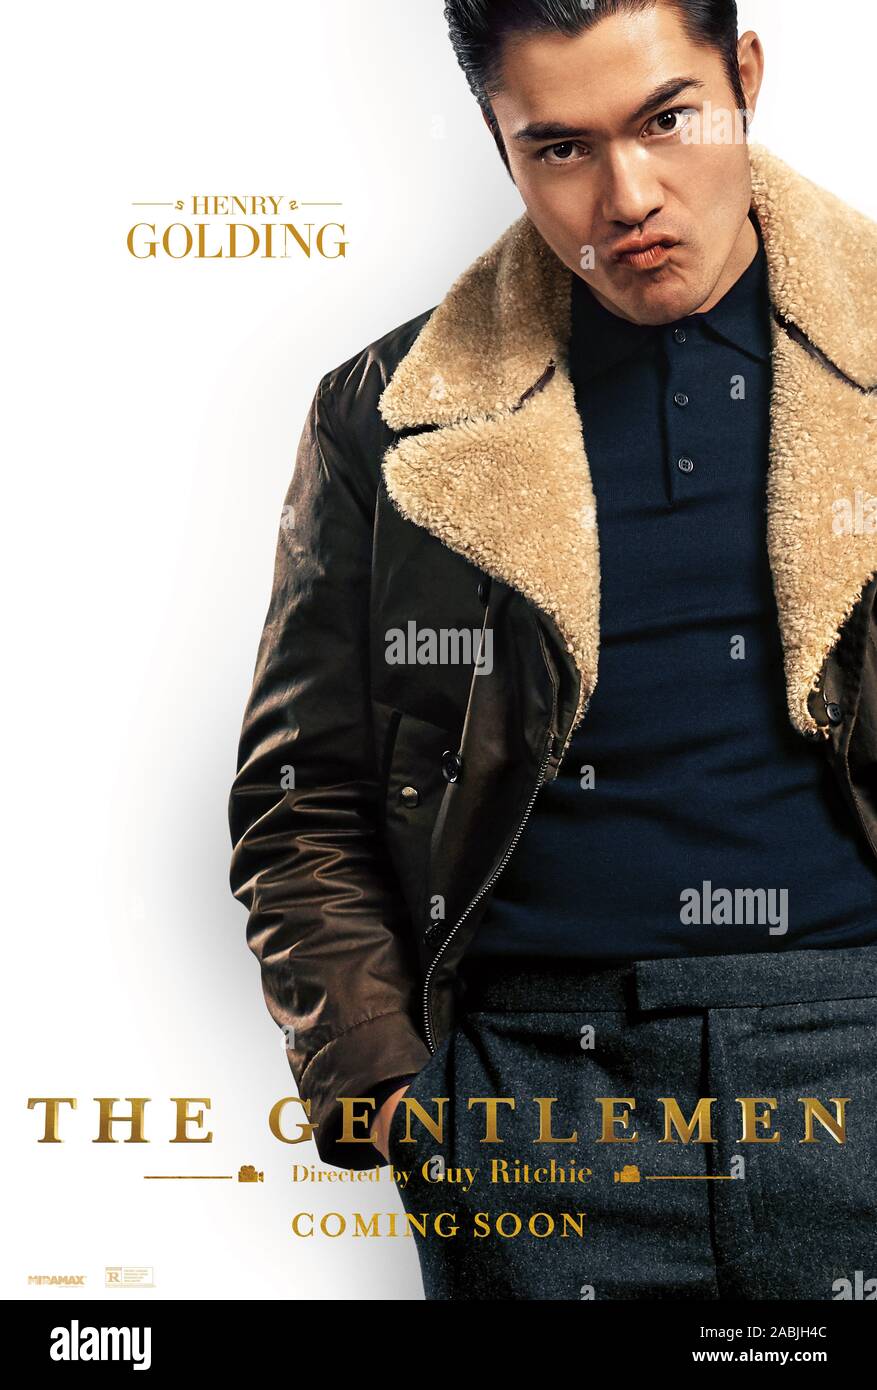 RELEASE DATE: January 24, 2020 TITLE: The Gentlemen STUDIO: Miramax DIRECTOR: Guy Ritchie PLOT: A British drug lord tries to sell off his highly profitable empire to a dynasty of Oklahoma billionaires. STARRING: HENRY GOLDING poster art. (Credit Image: © Miramax/Entertainment Pictures) Stock Photo